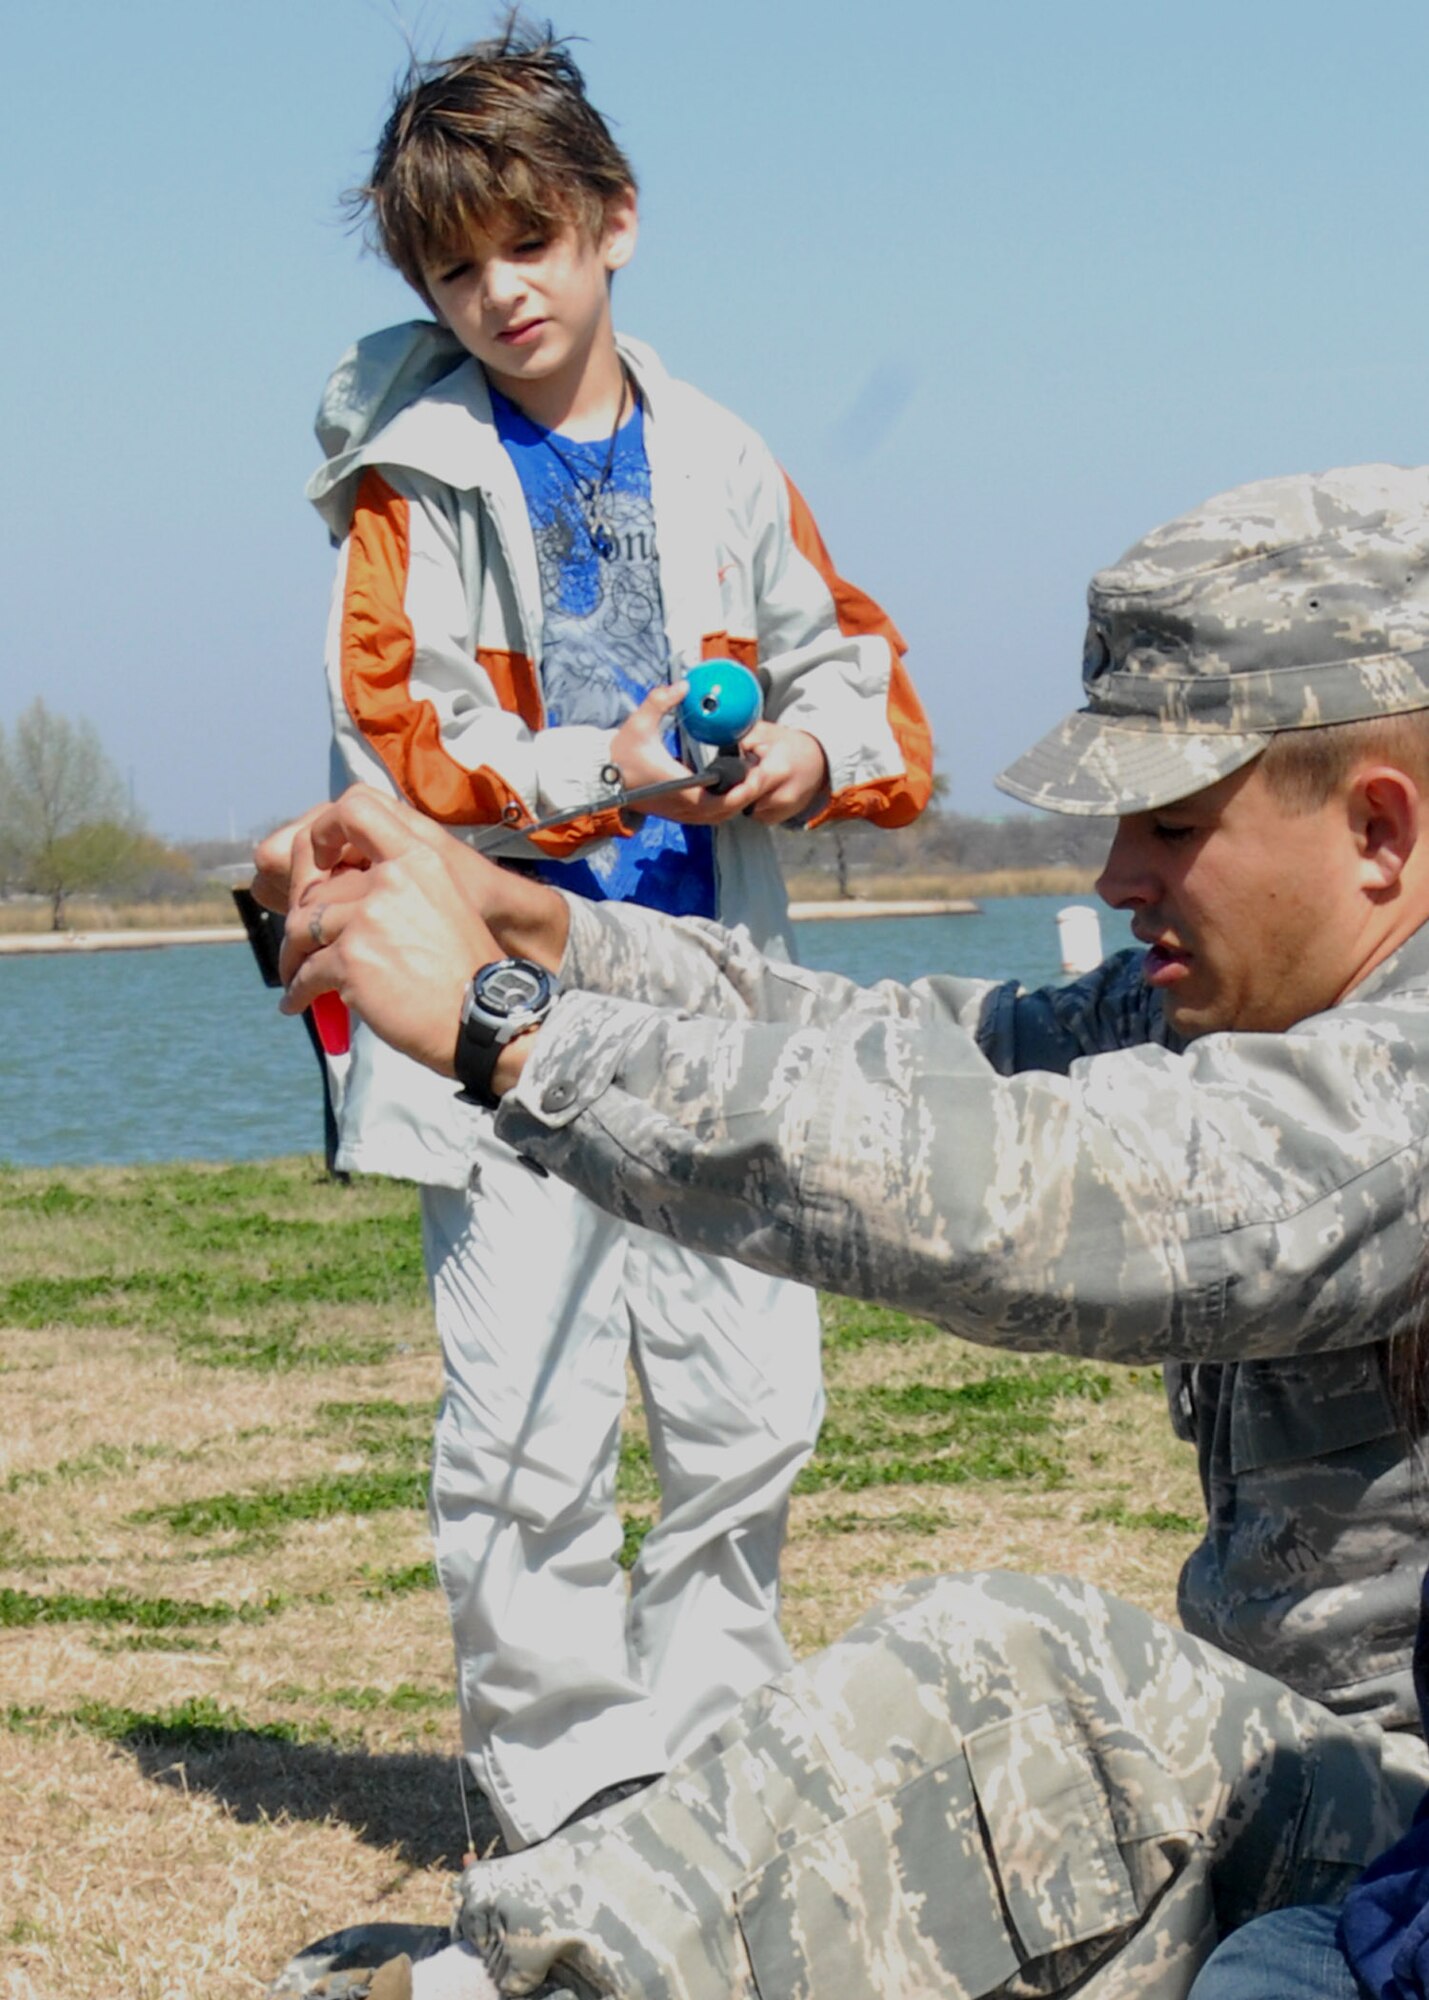 Fishing clinic hooks youth attention > Goodfellow Air Force Base